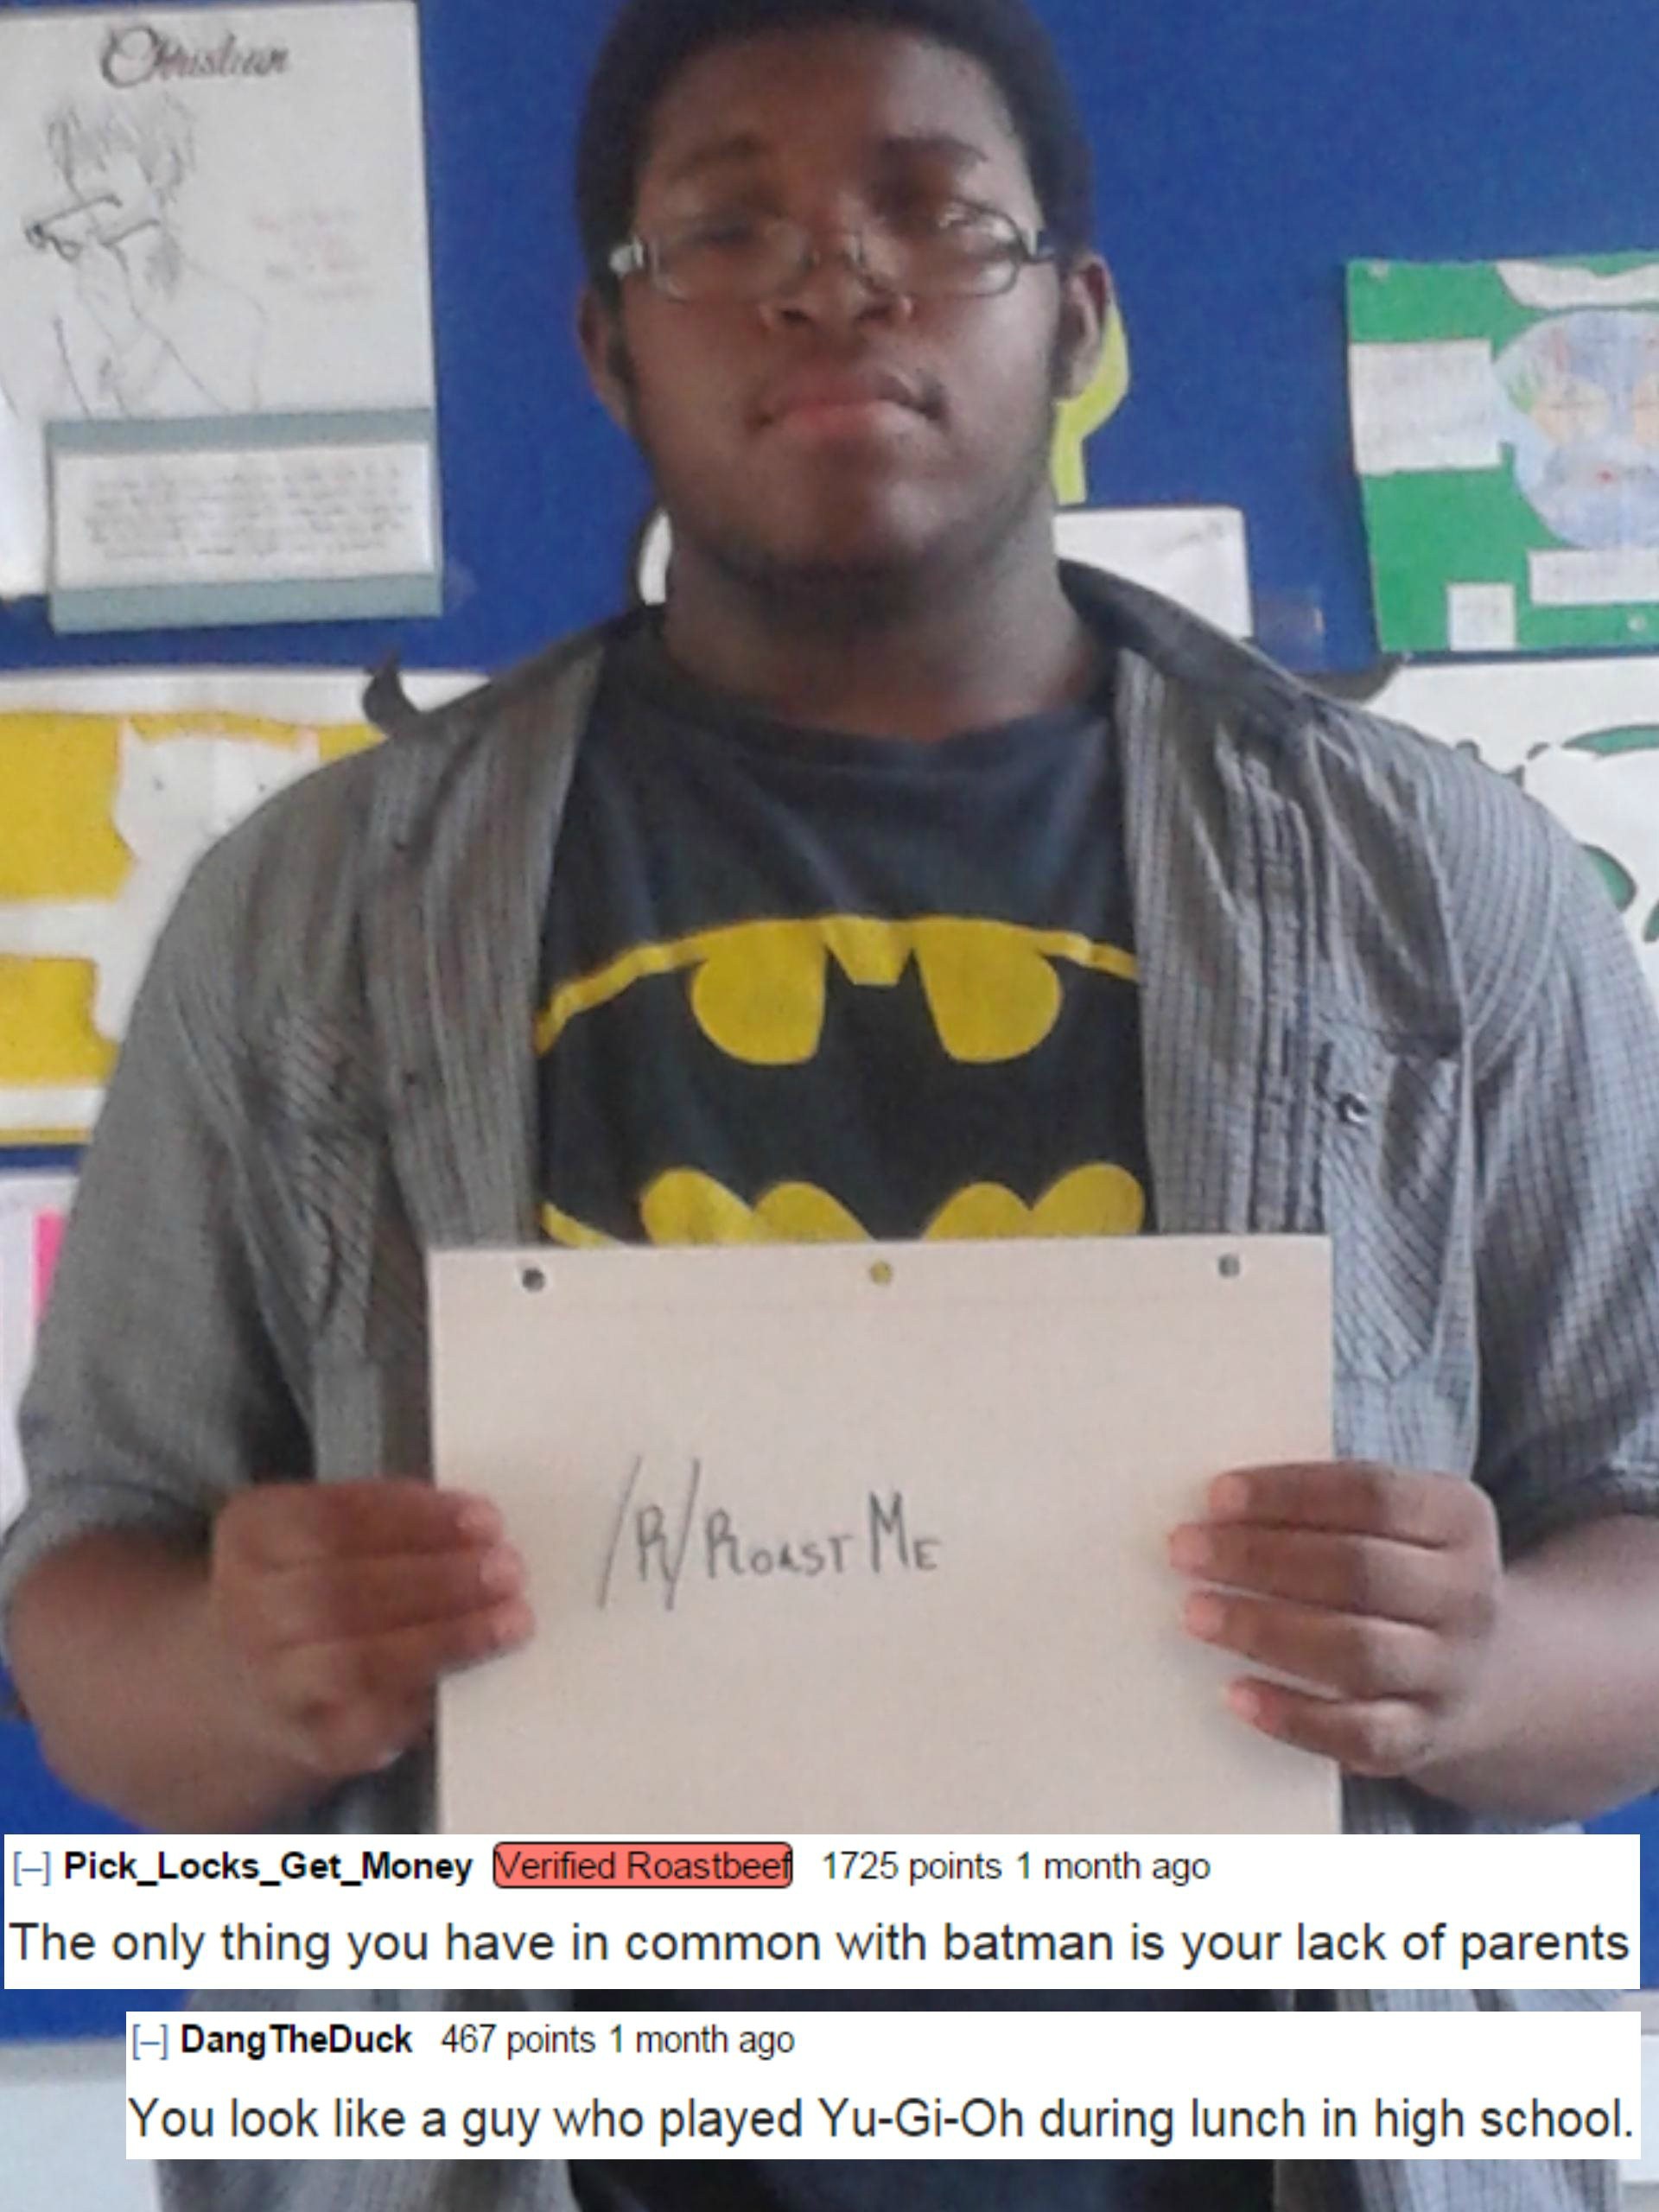 roast me - P Roast Me Pick_Locks_Get_Money Verified Roastbeef 1725 points 1 month ago The only thing you have in common with batman is your lack of parents Dang TheDuck 467 points 1 month ago You look a guy who played YuGiOh during lunch in high school.